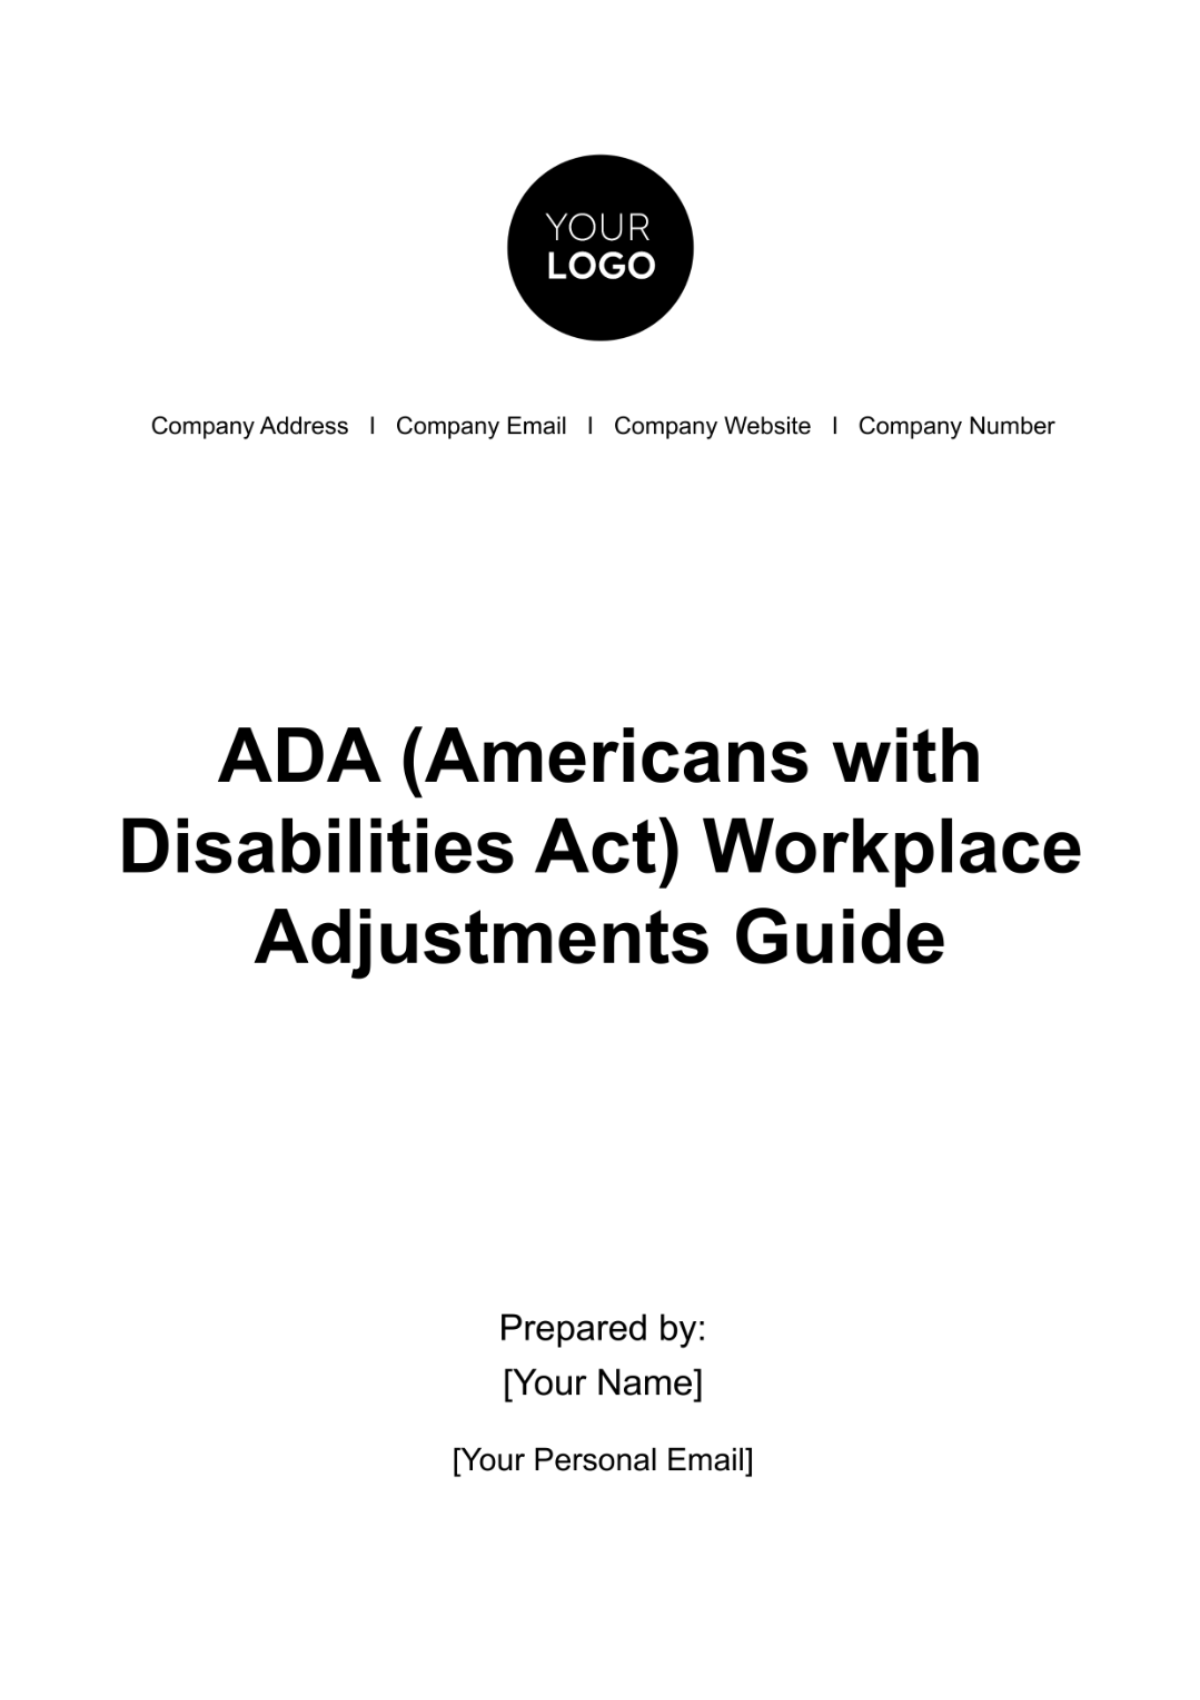 ADA (Americans with Disabilities Act) Workplace Adjustments Guide HR Template